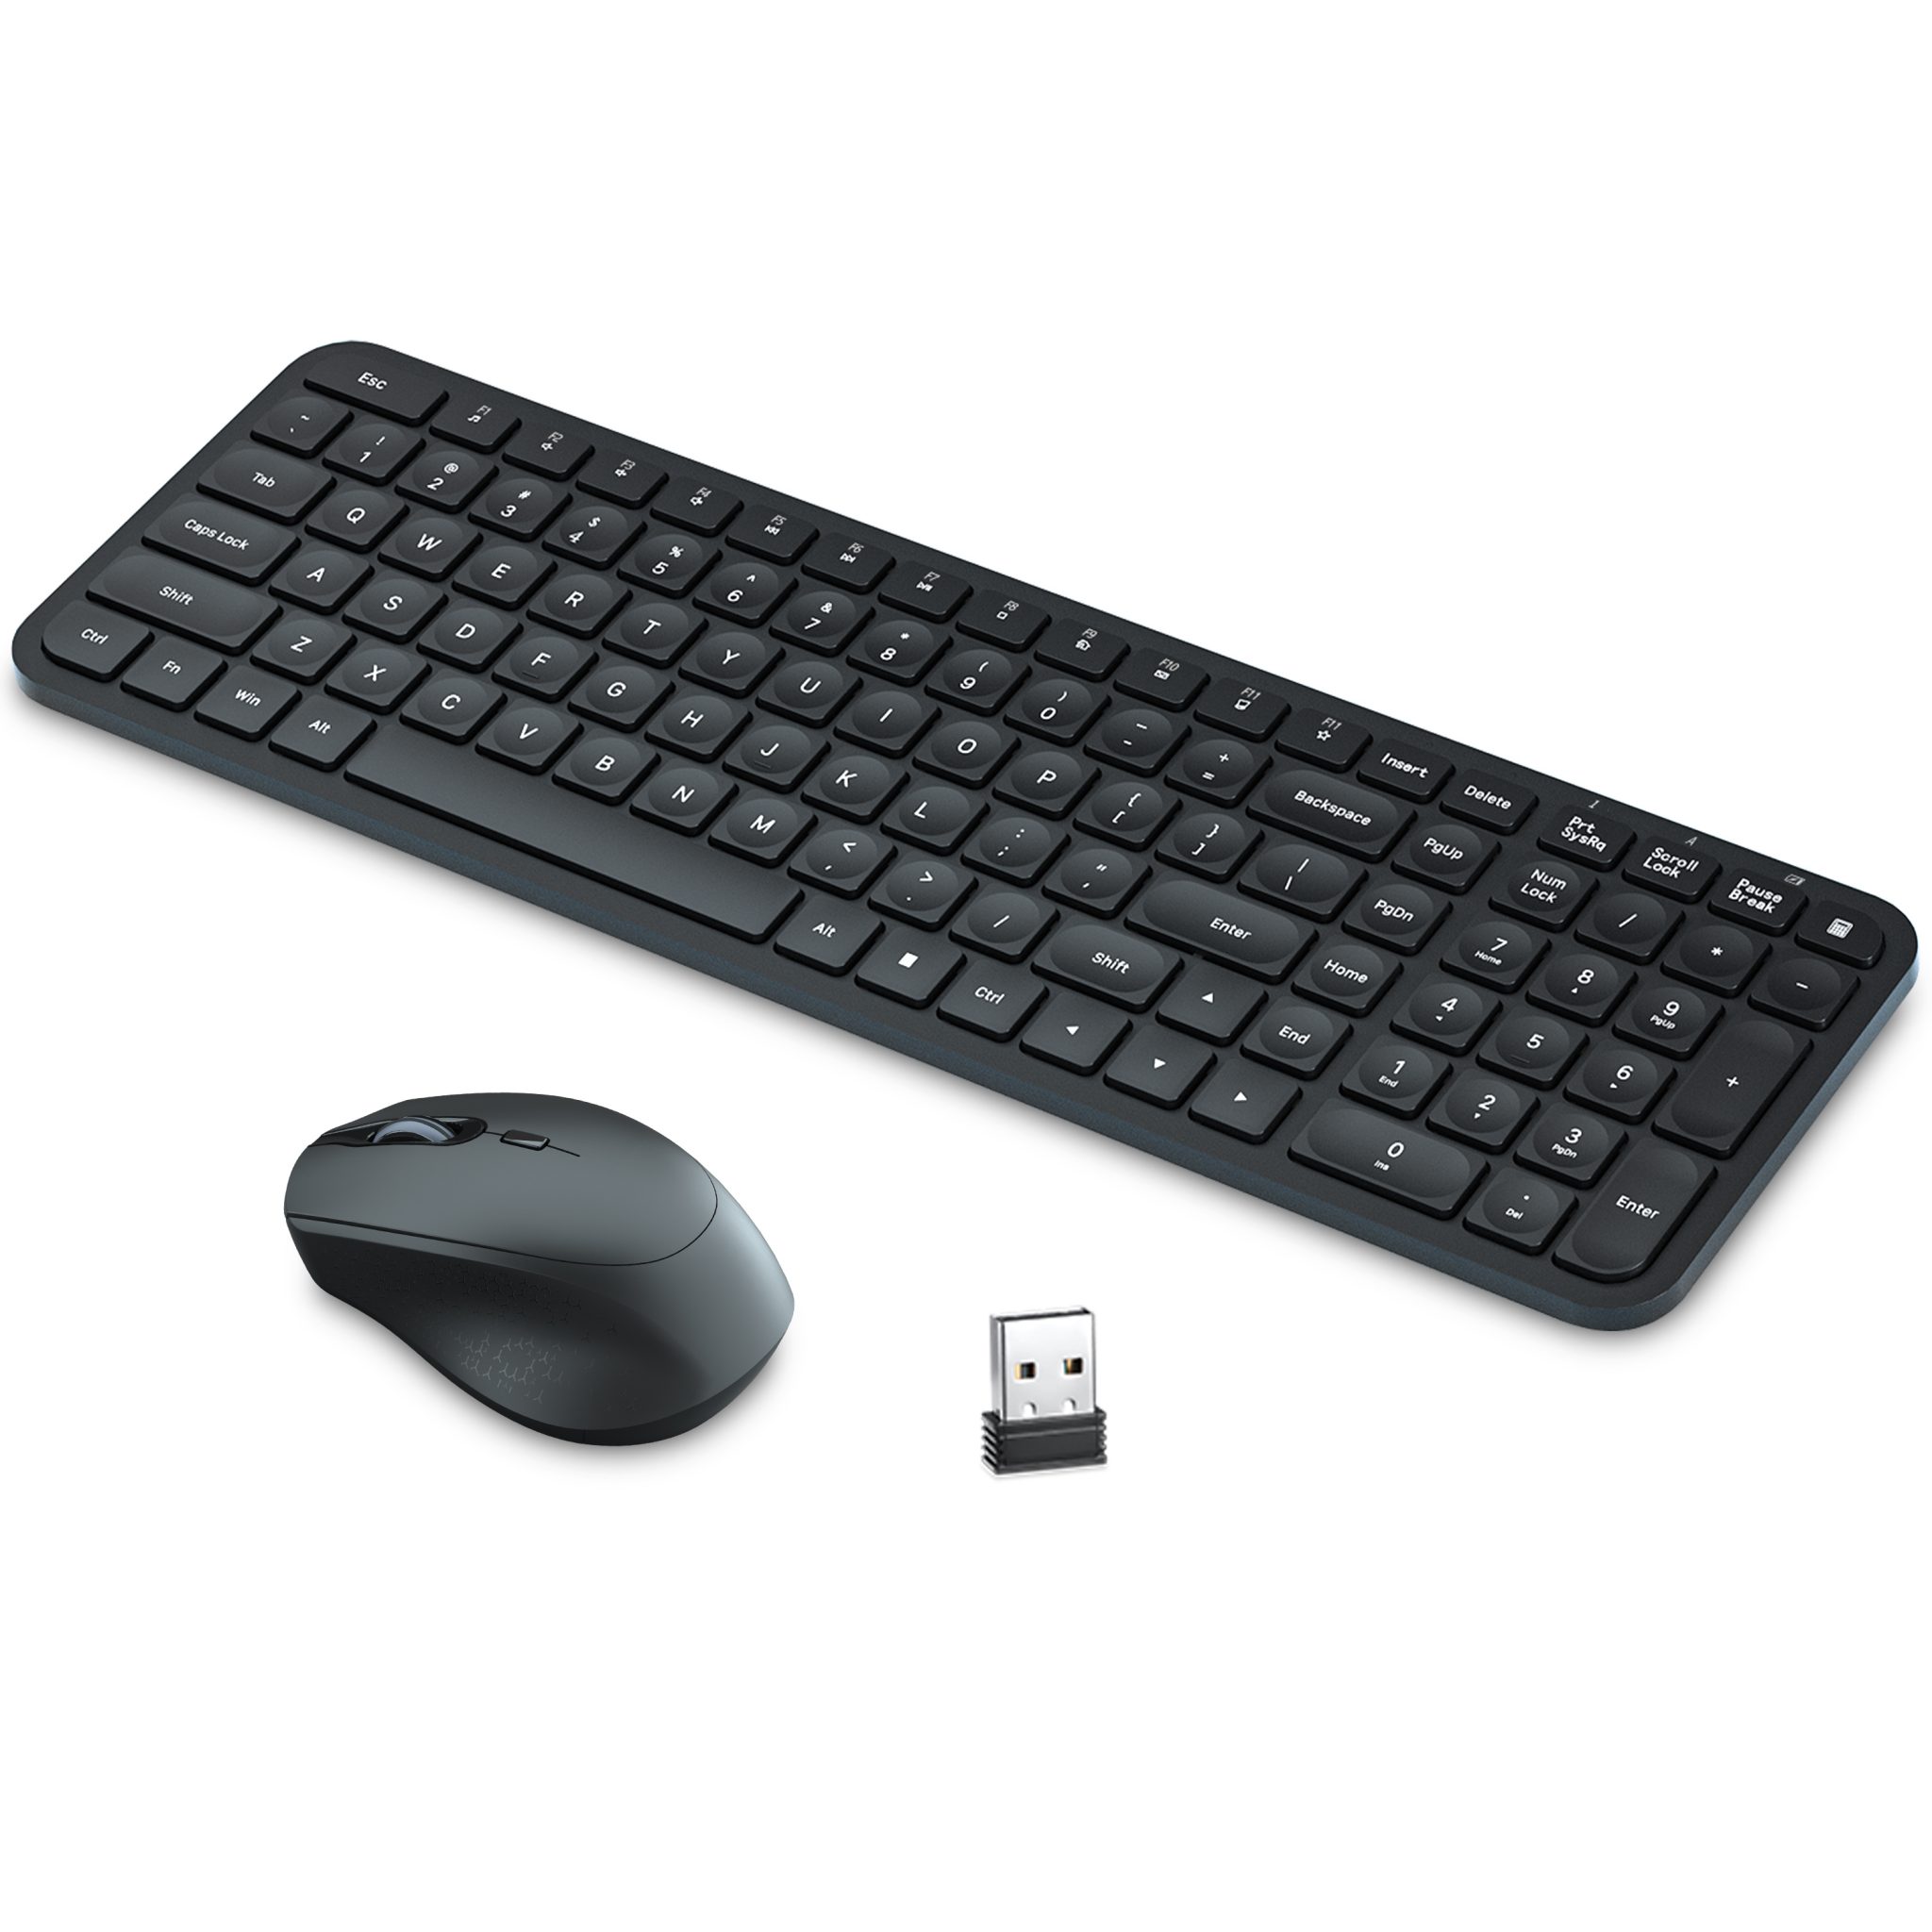 2.4GHZ USB Wireless Slim Keyboard and Cordless Mouse Combo Kit Set for PC Laptop 